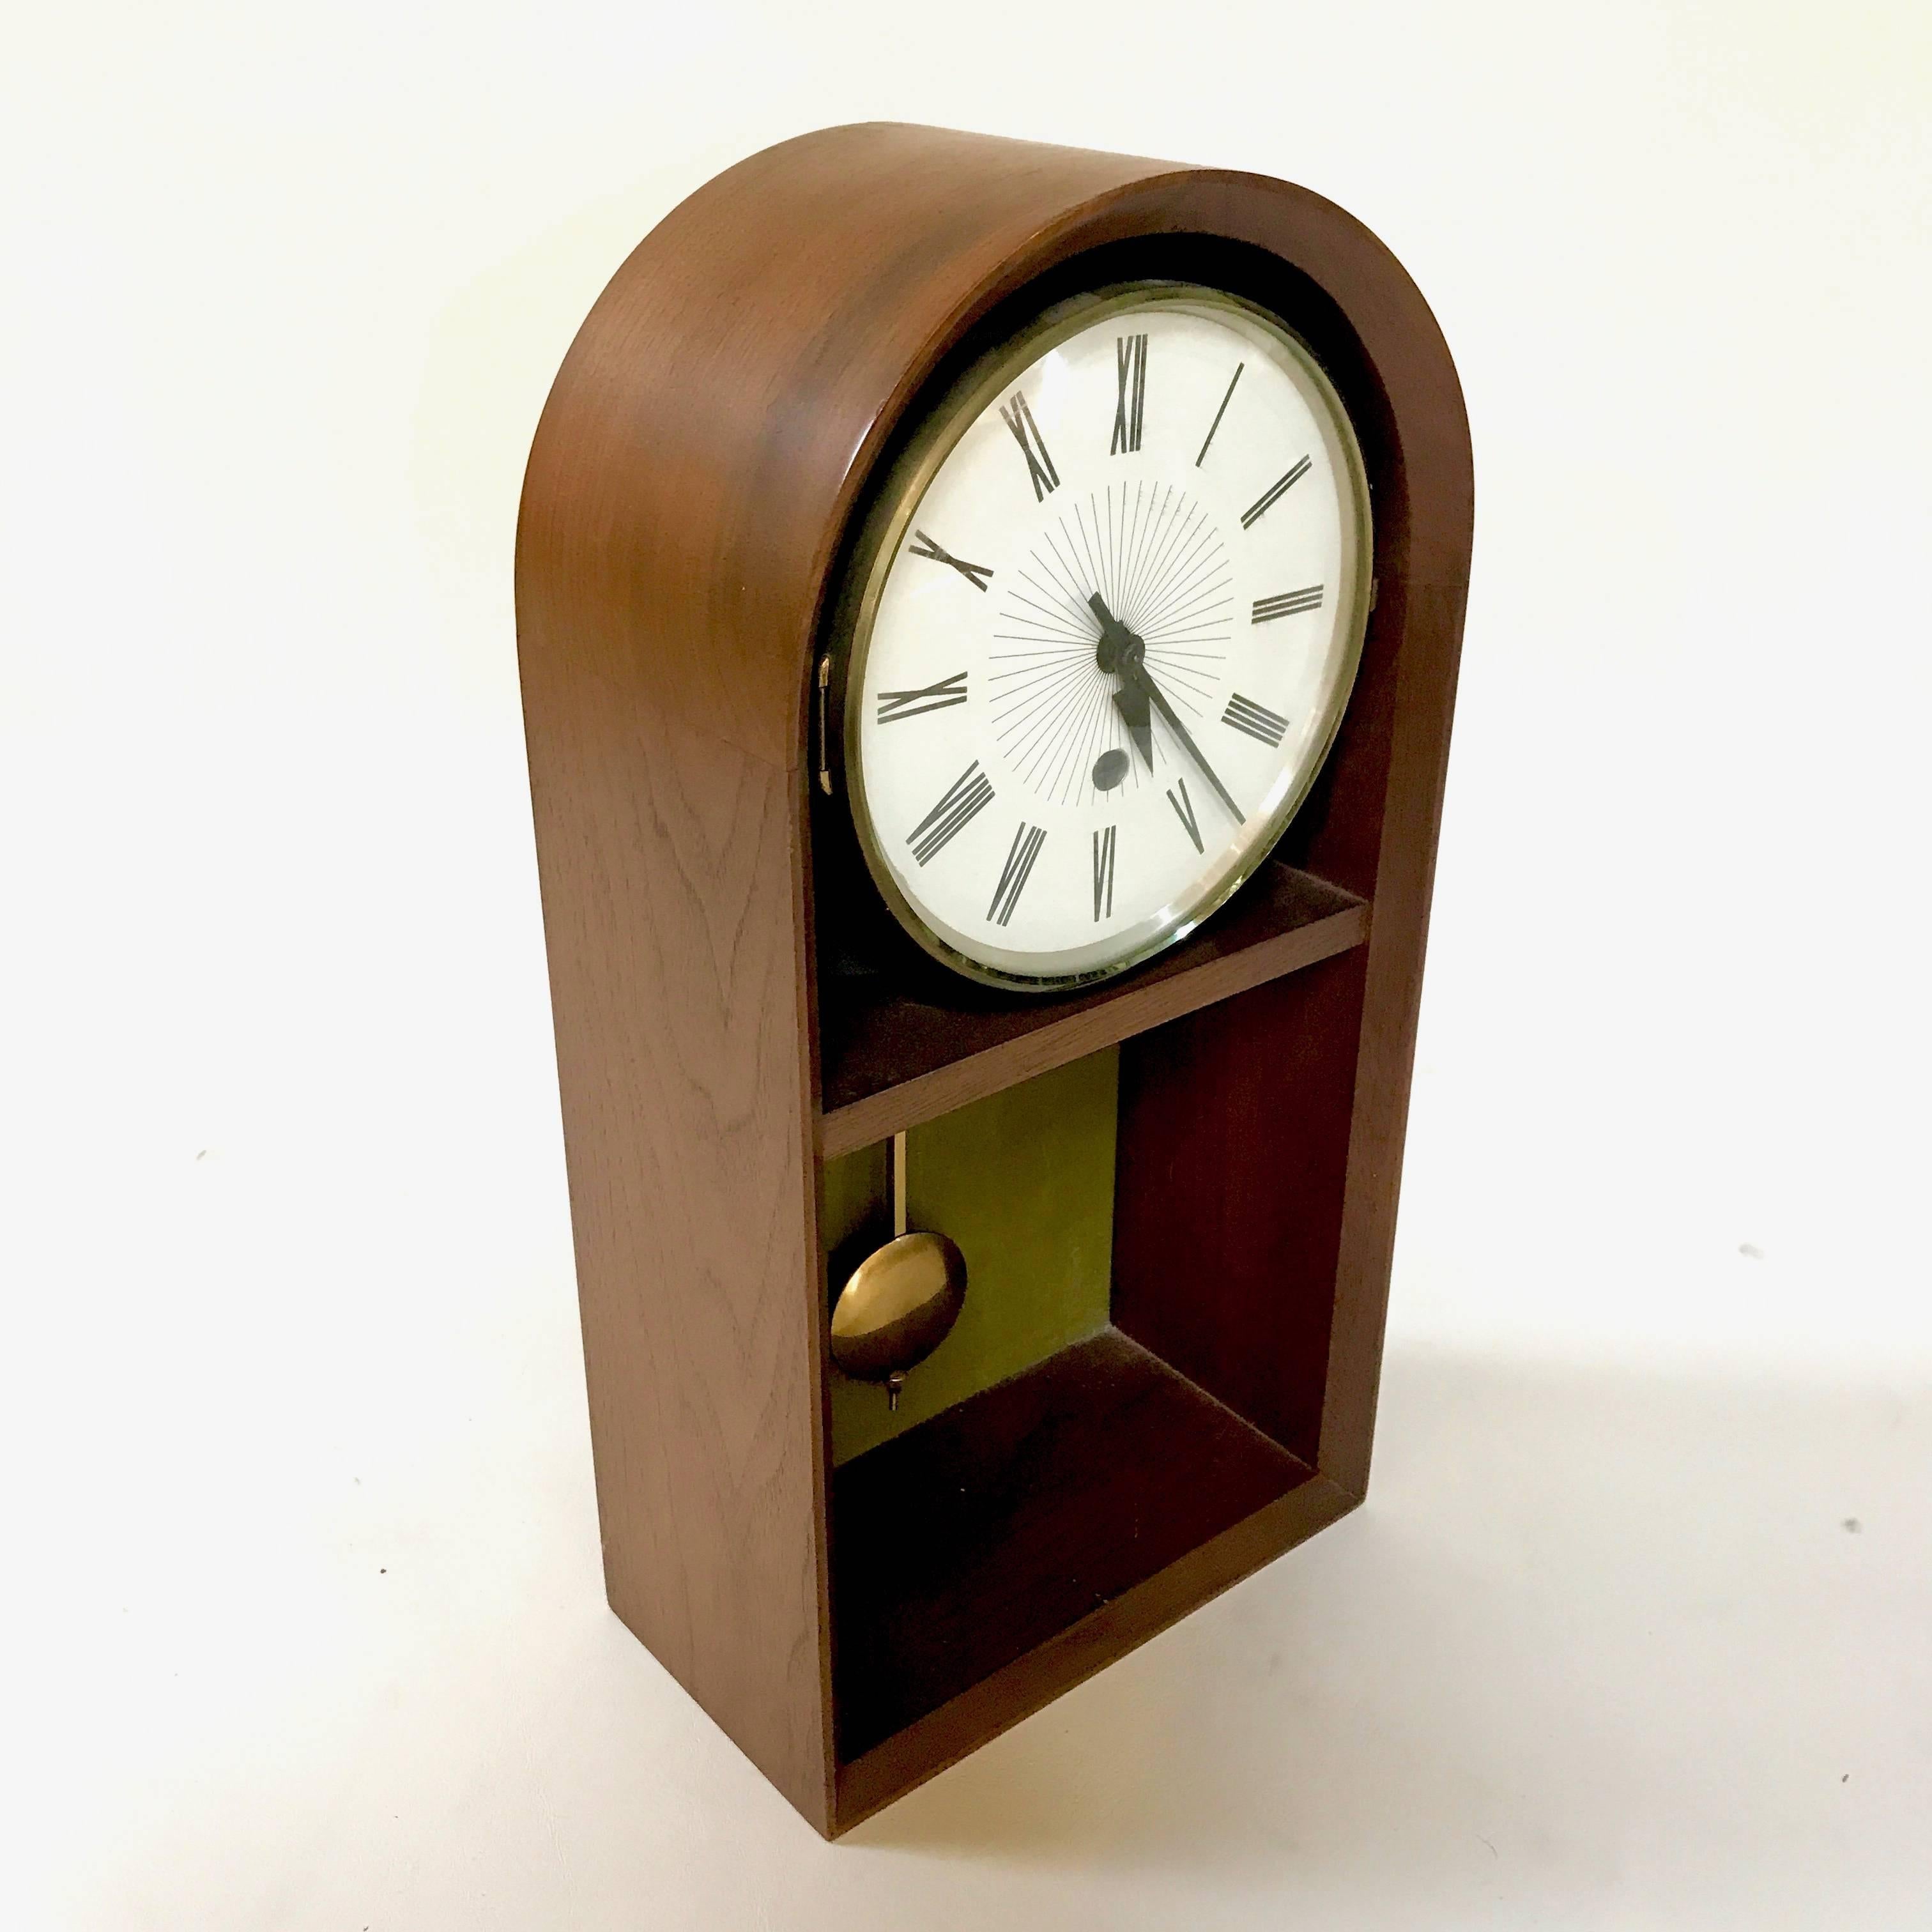 Mid-Century walnut pendulum tabletop pendulum clock by Howard Miller, attributed to Arthur Umanoff. In excellent condition with bubble glass over clock face and original key. Resembles a grandfather clock, with a beautiful walnut case. Eight-day